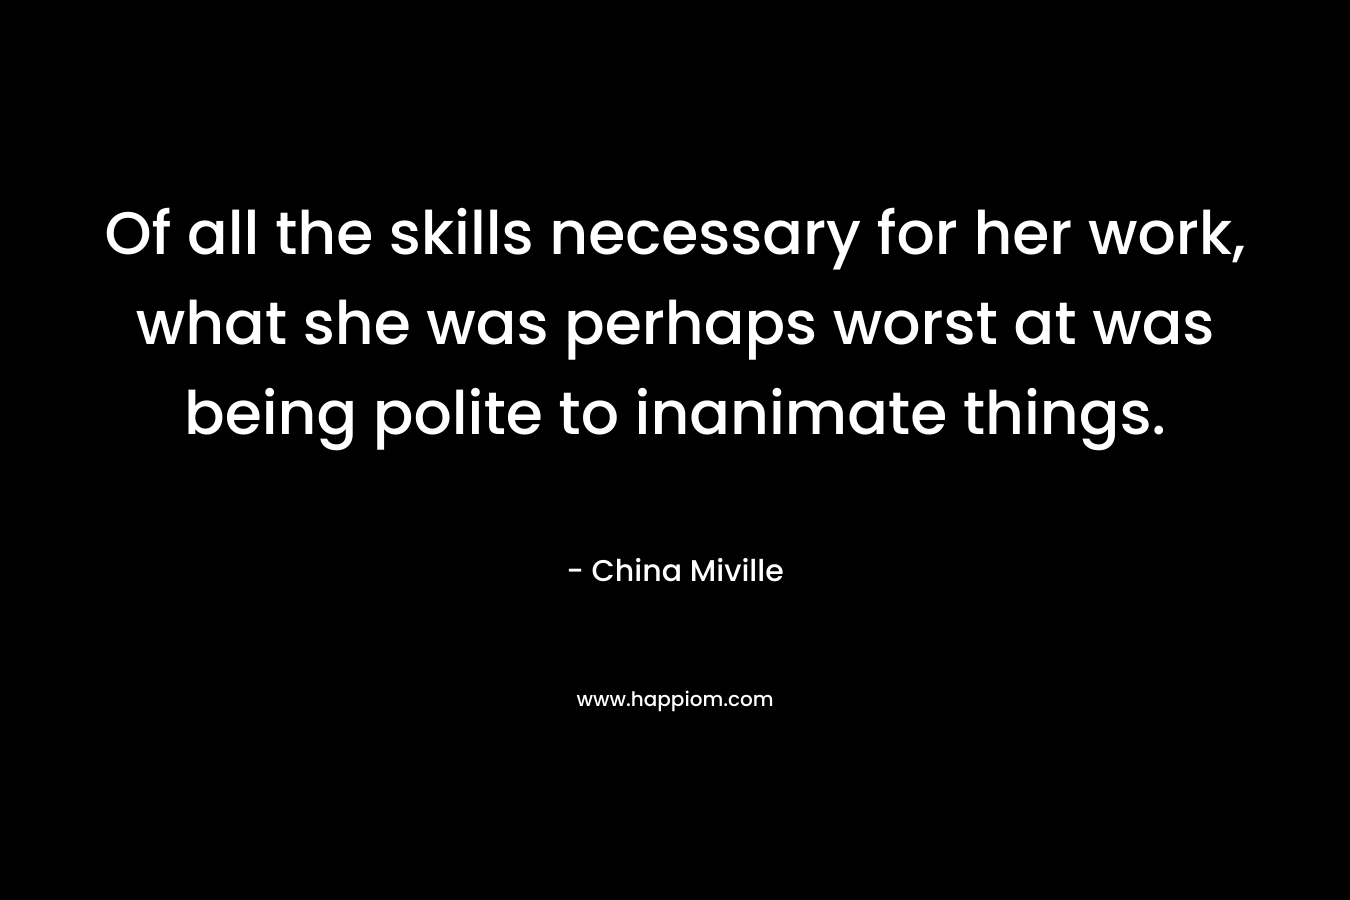 Of all the skills necessary for her work, what she was perhaps worst at was being polite to inanimate things.